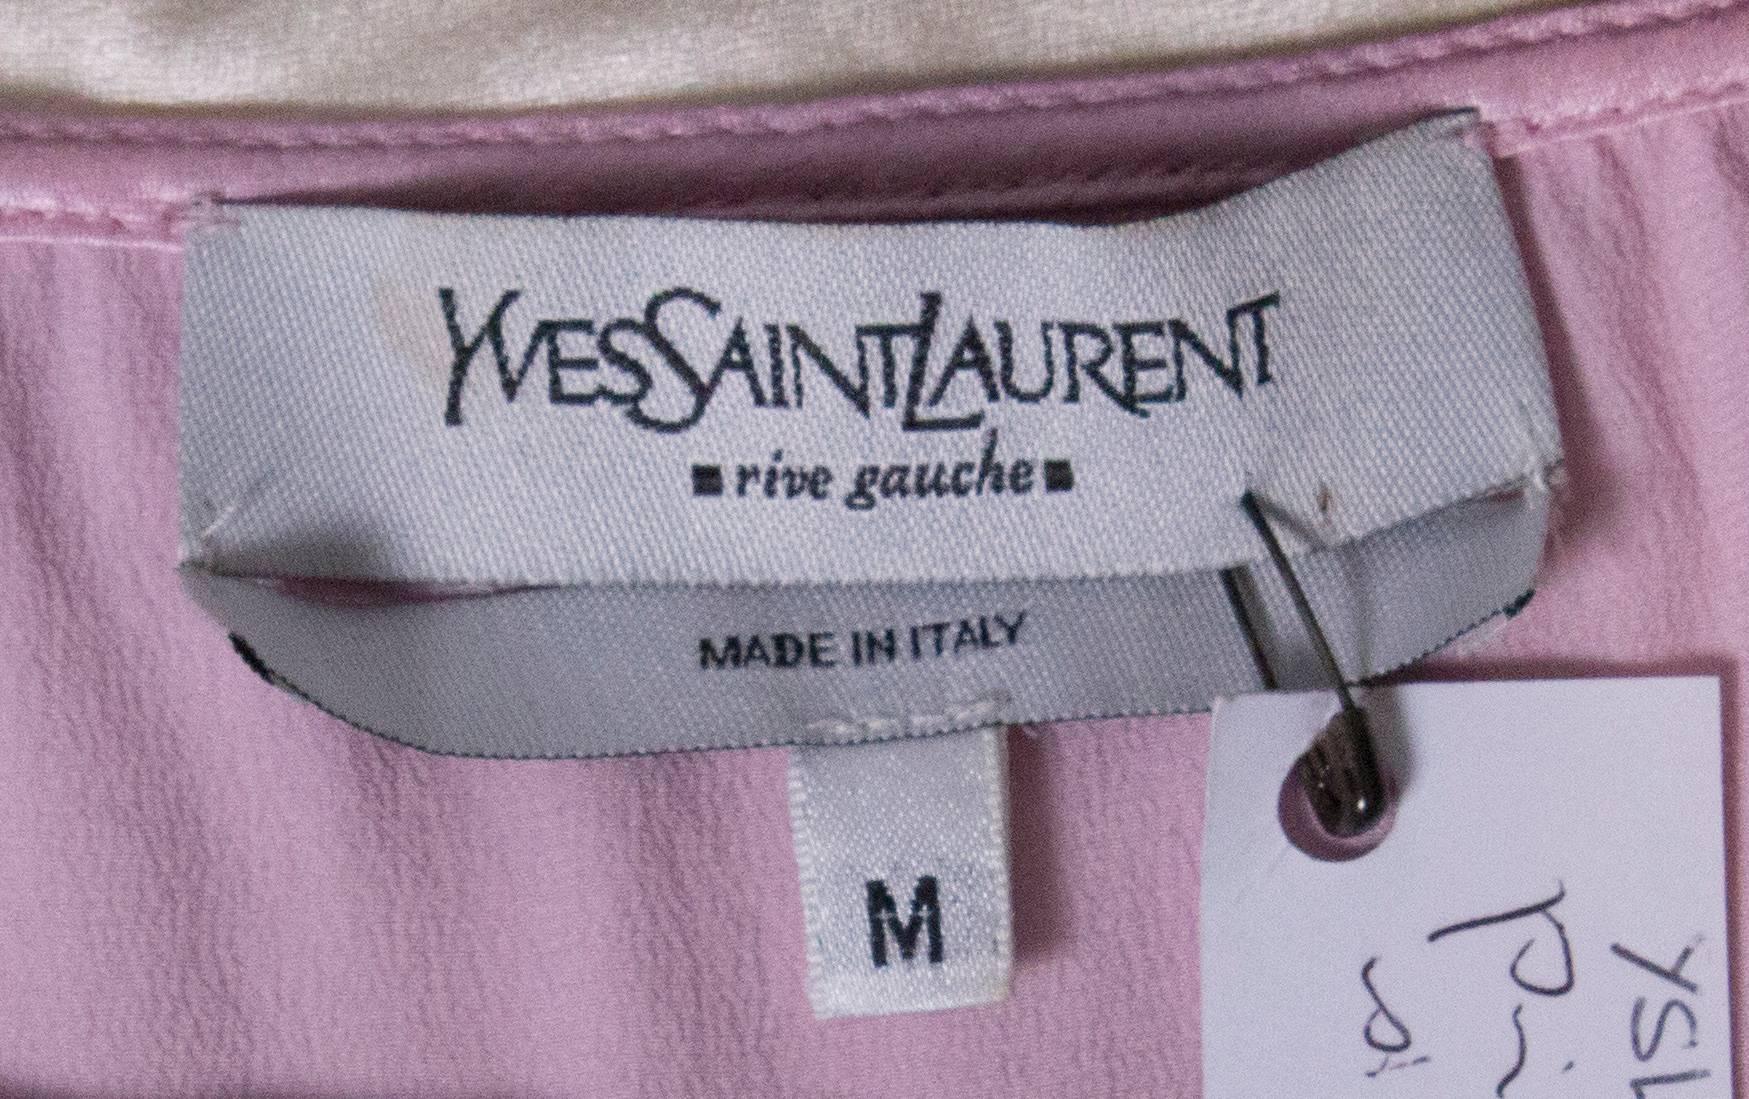 Vintage Yves Saint Laurent Rive Gauche Pink and White Silk Top 3